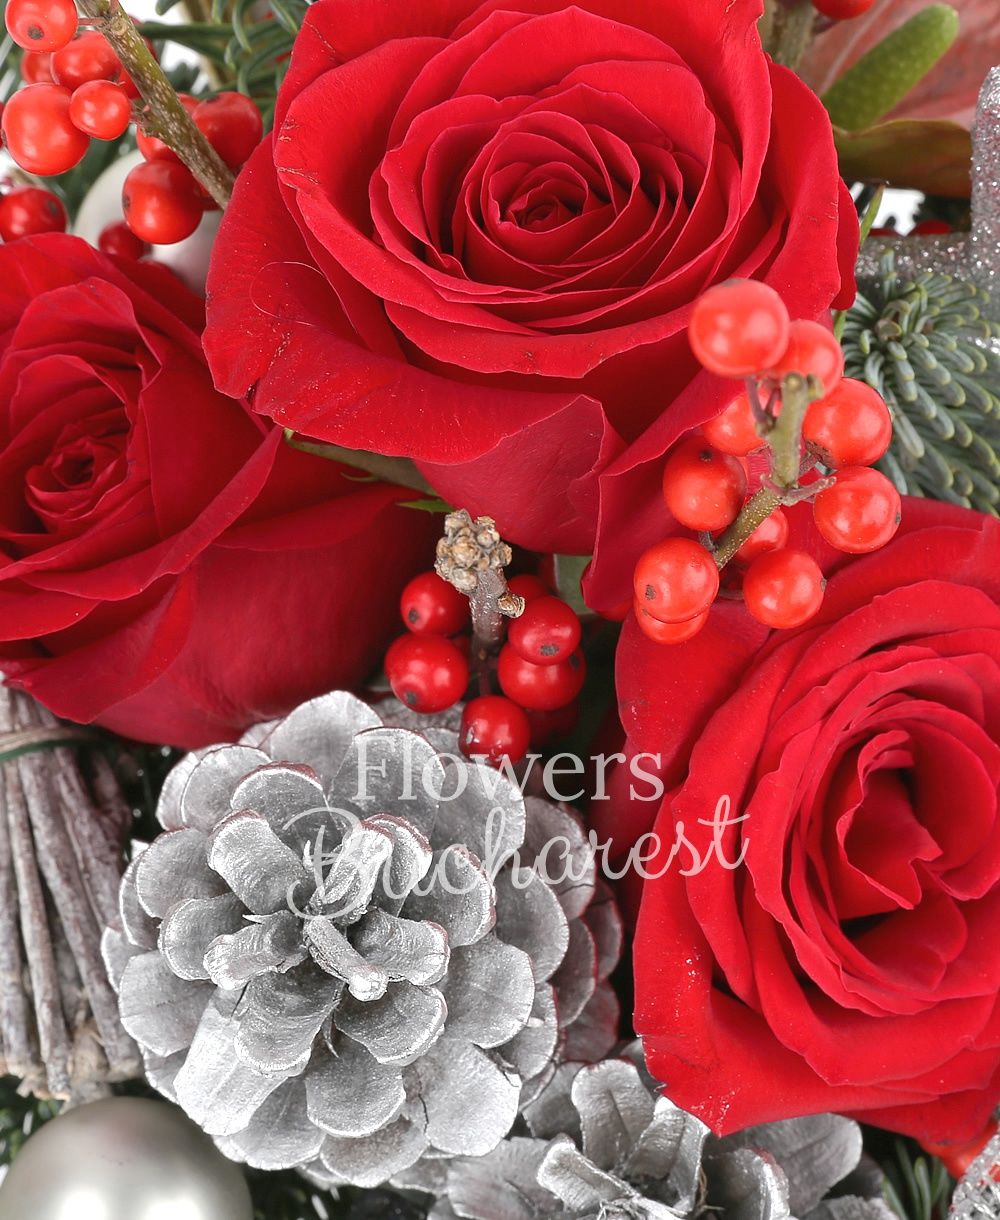 3 red roses, 2 red anthurium, globes, stars, dried orange slices, greenery